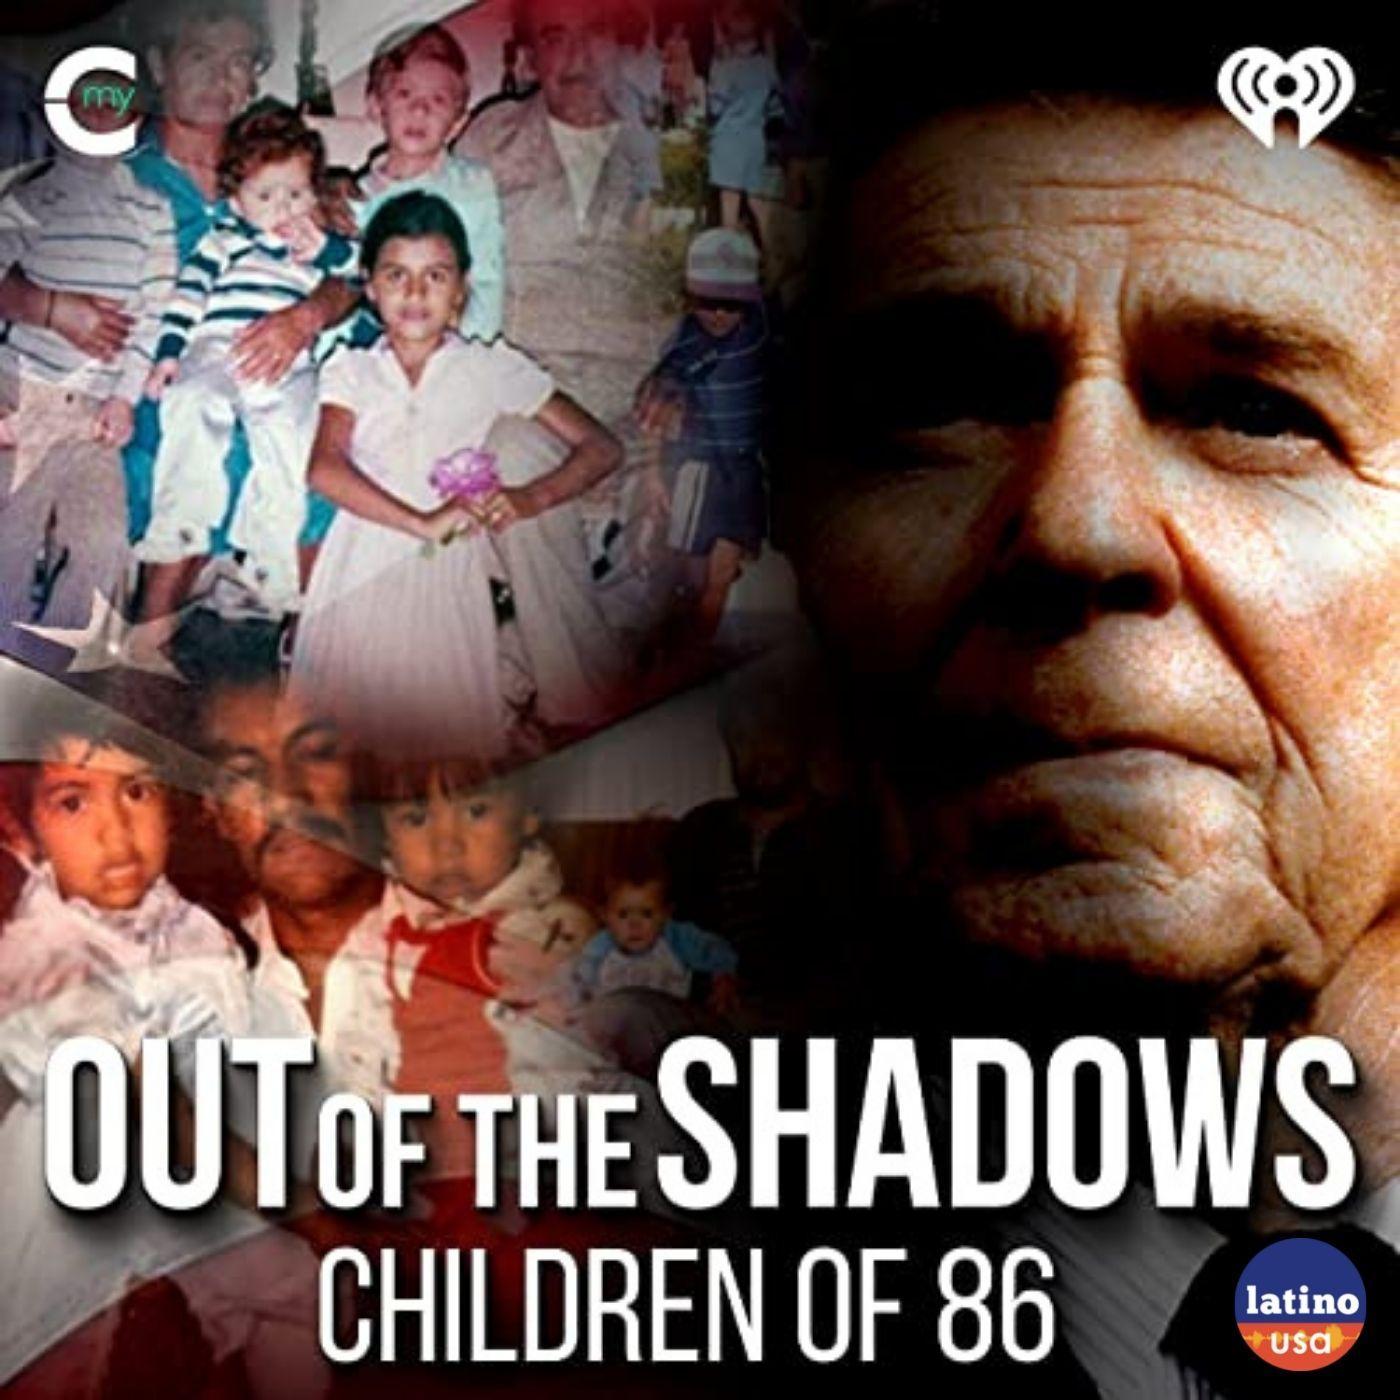 Thumbnail for "Out of the Shadows: Children of 86".